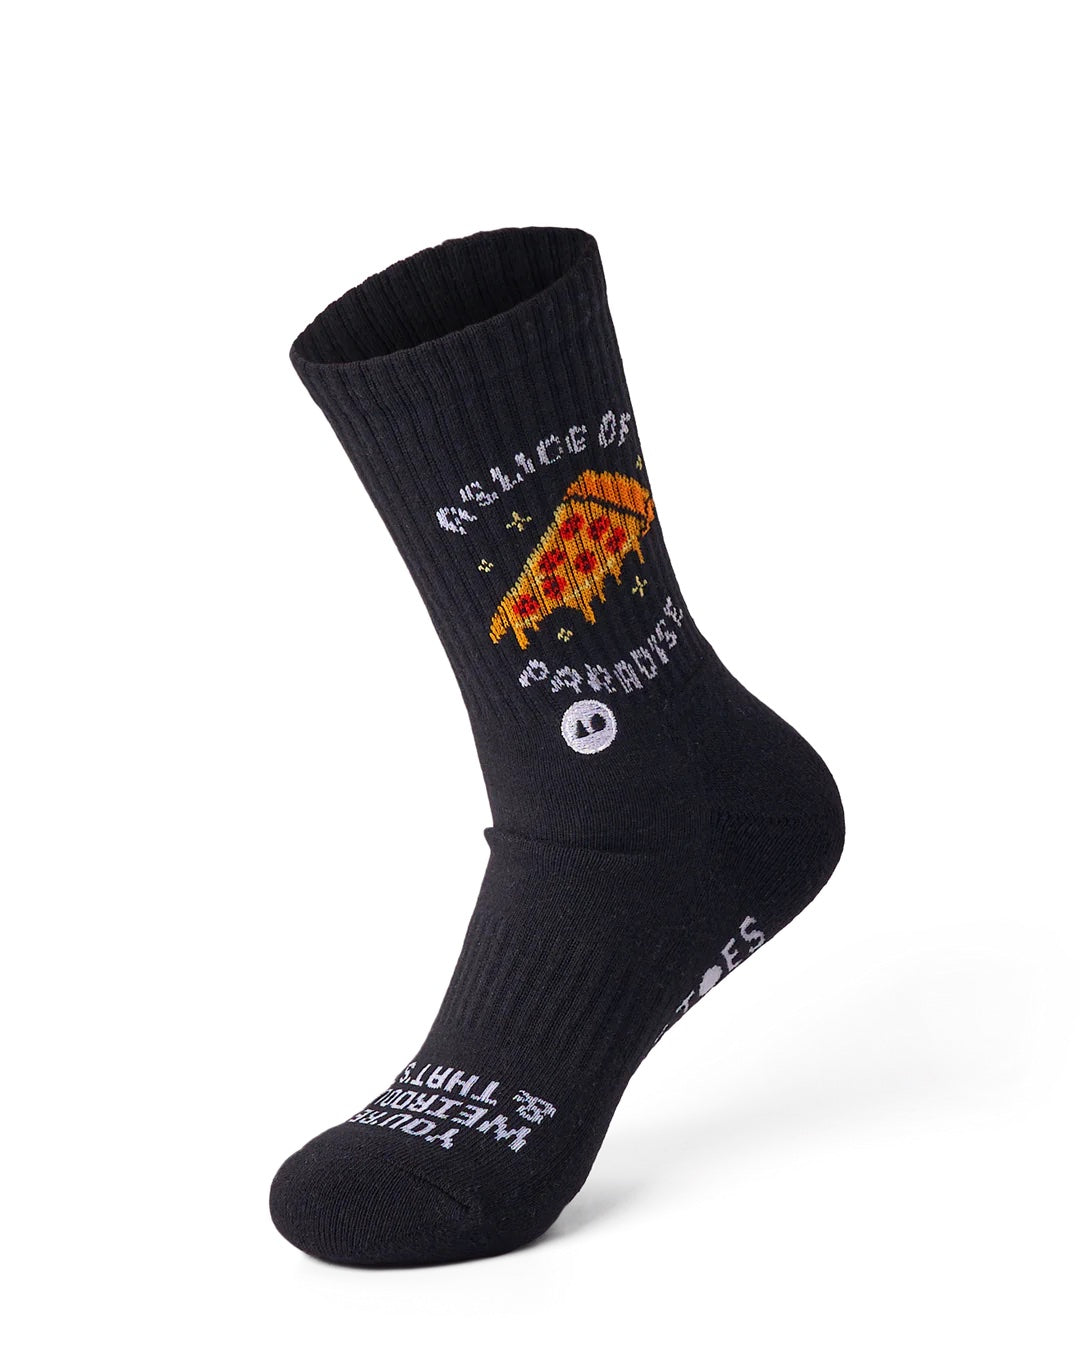 Talking Toes Weird Pizza Athletic Sock